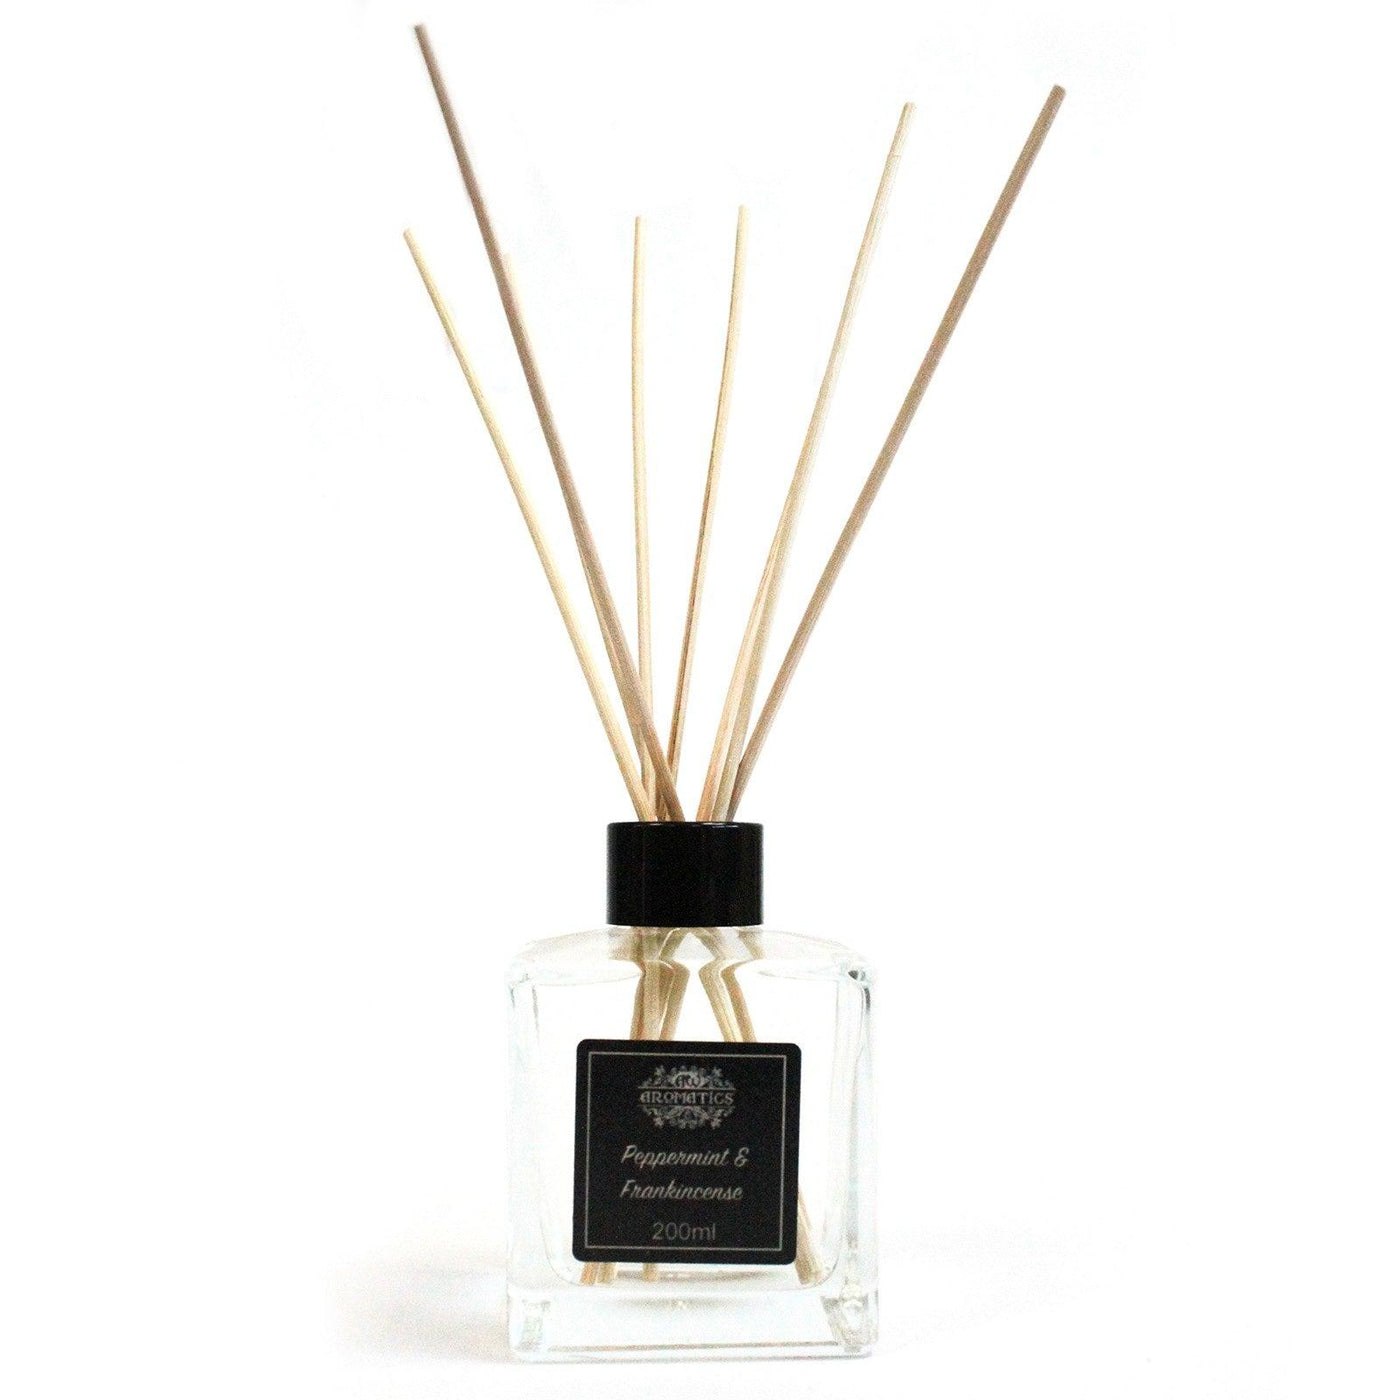 200ml Peppermint & Frankincense Essential Oil Reed Fragrance Diffuser.